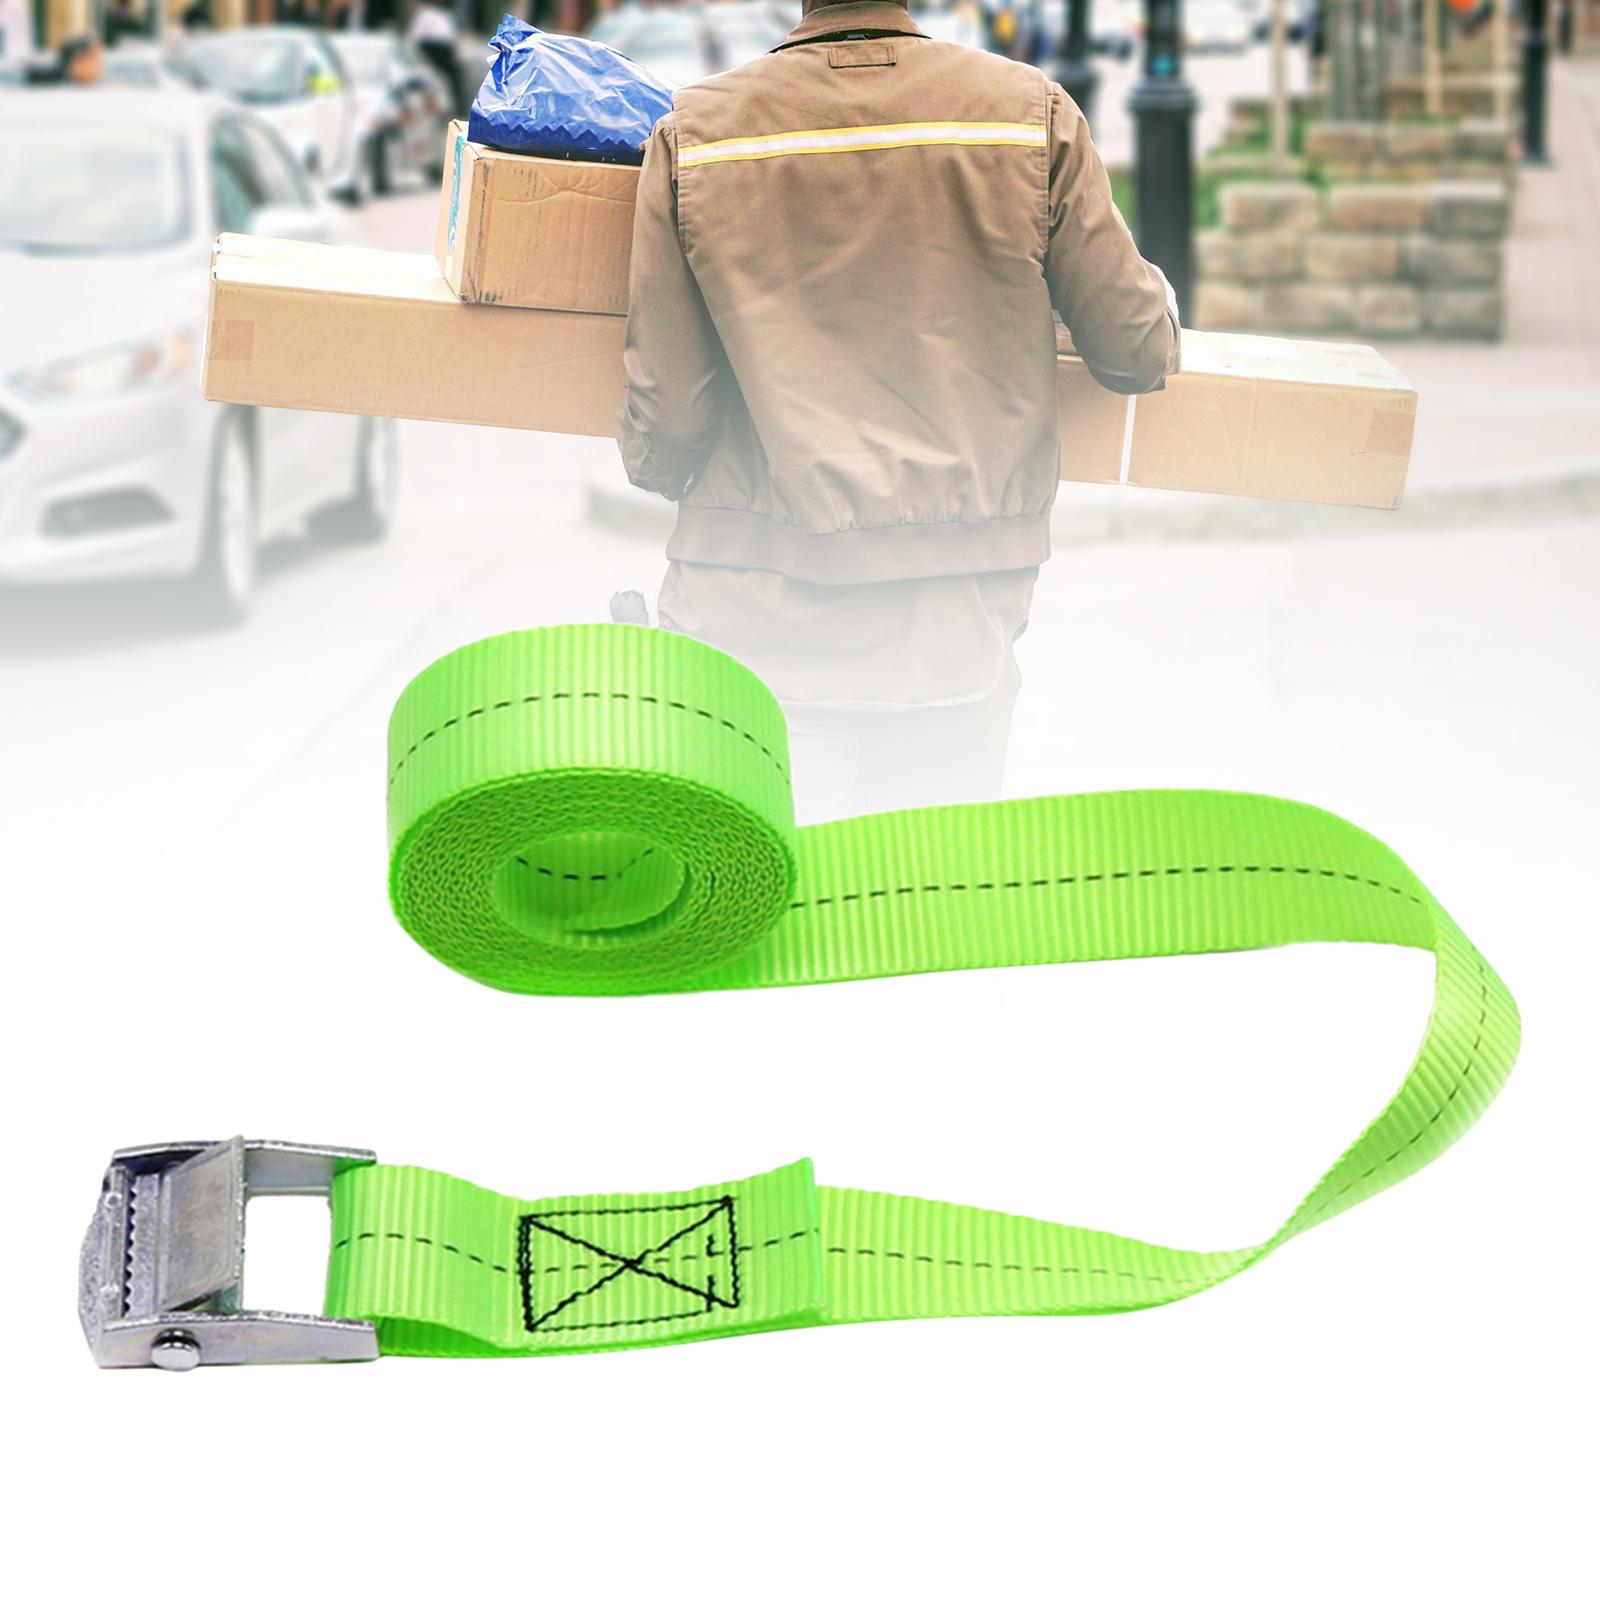 Luggage Strap Travel Luminous Lashing Straps for Traveling Outdoor Trips 157.5inch